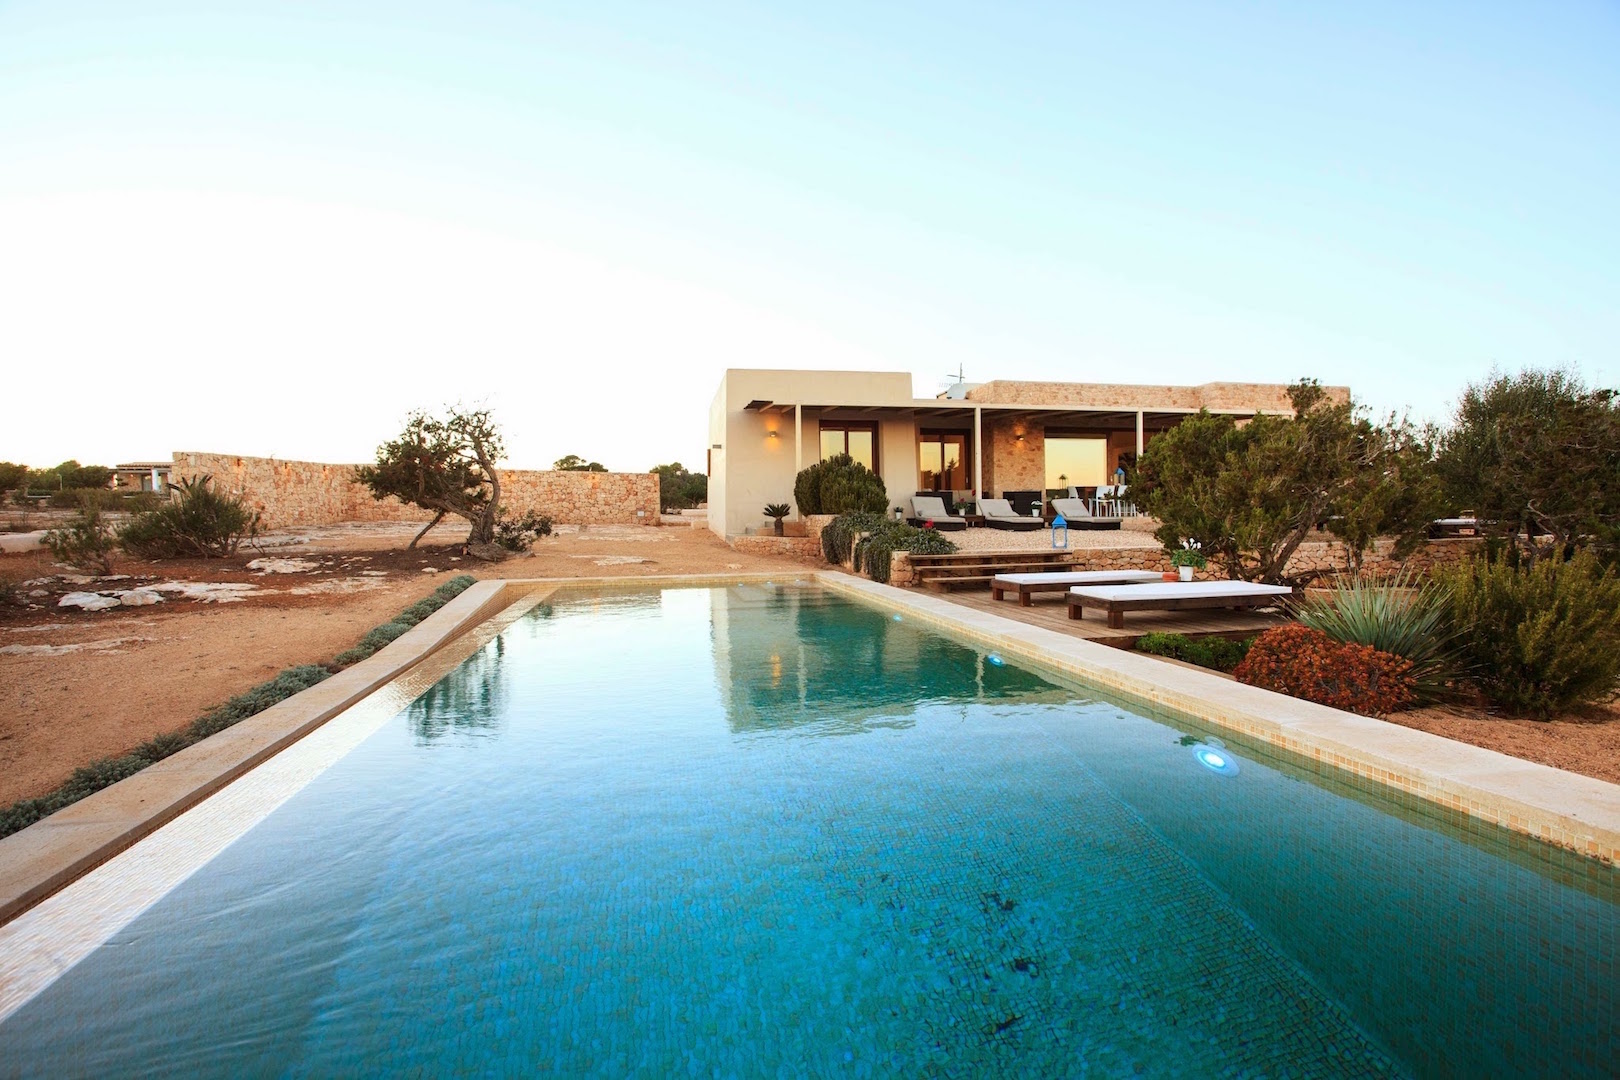 House with private pool to rent in the island of Formentera, Spain